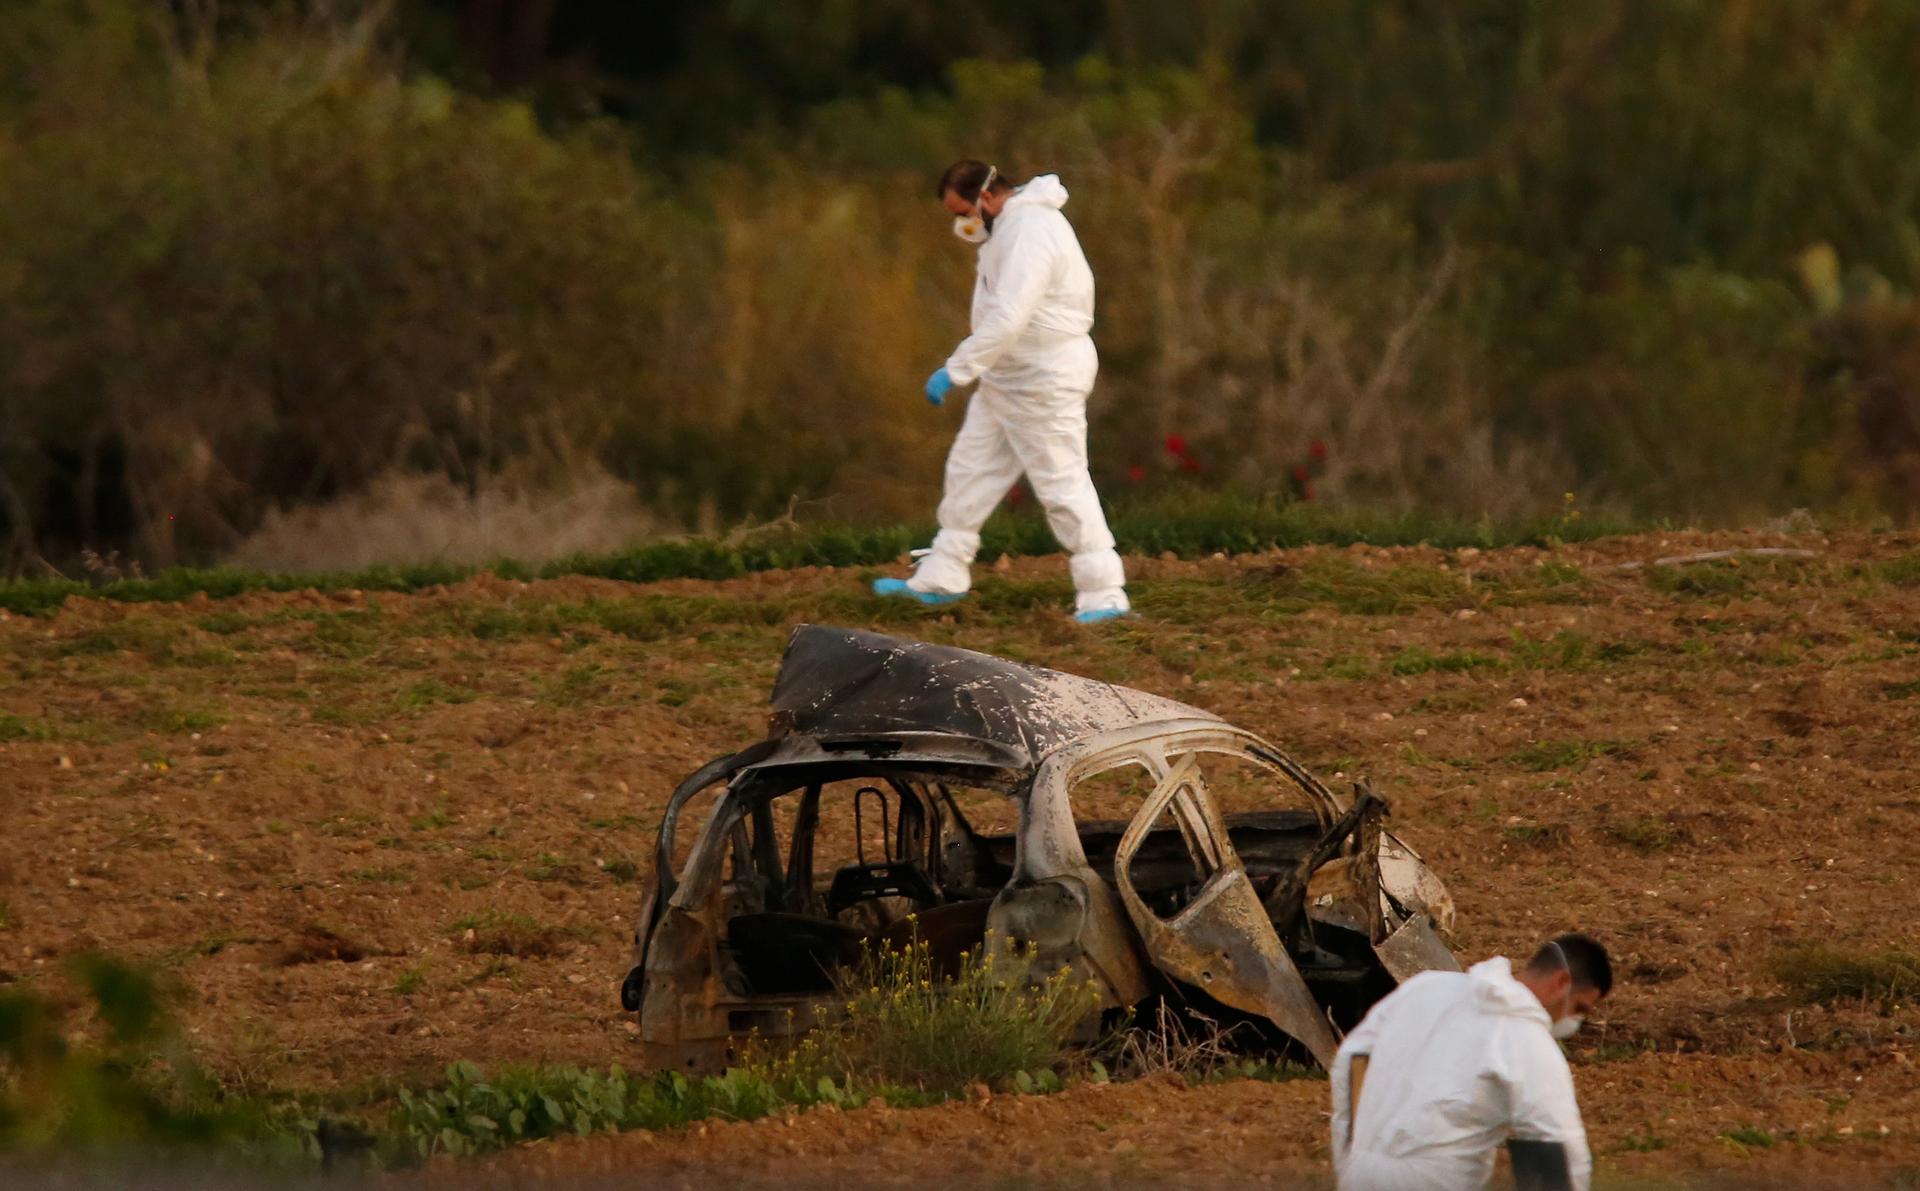 Forensic experts walk in a field after a powerful bomb blew up a car and killed investigative journalist Daphne Caruana Galizia